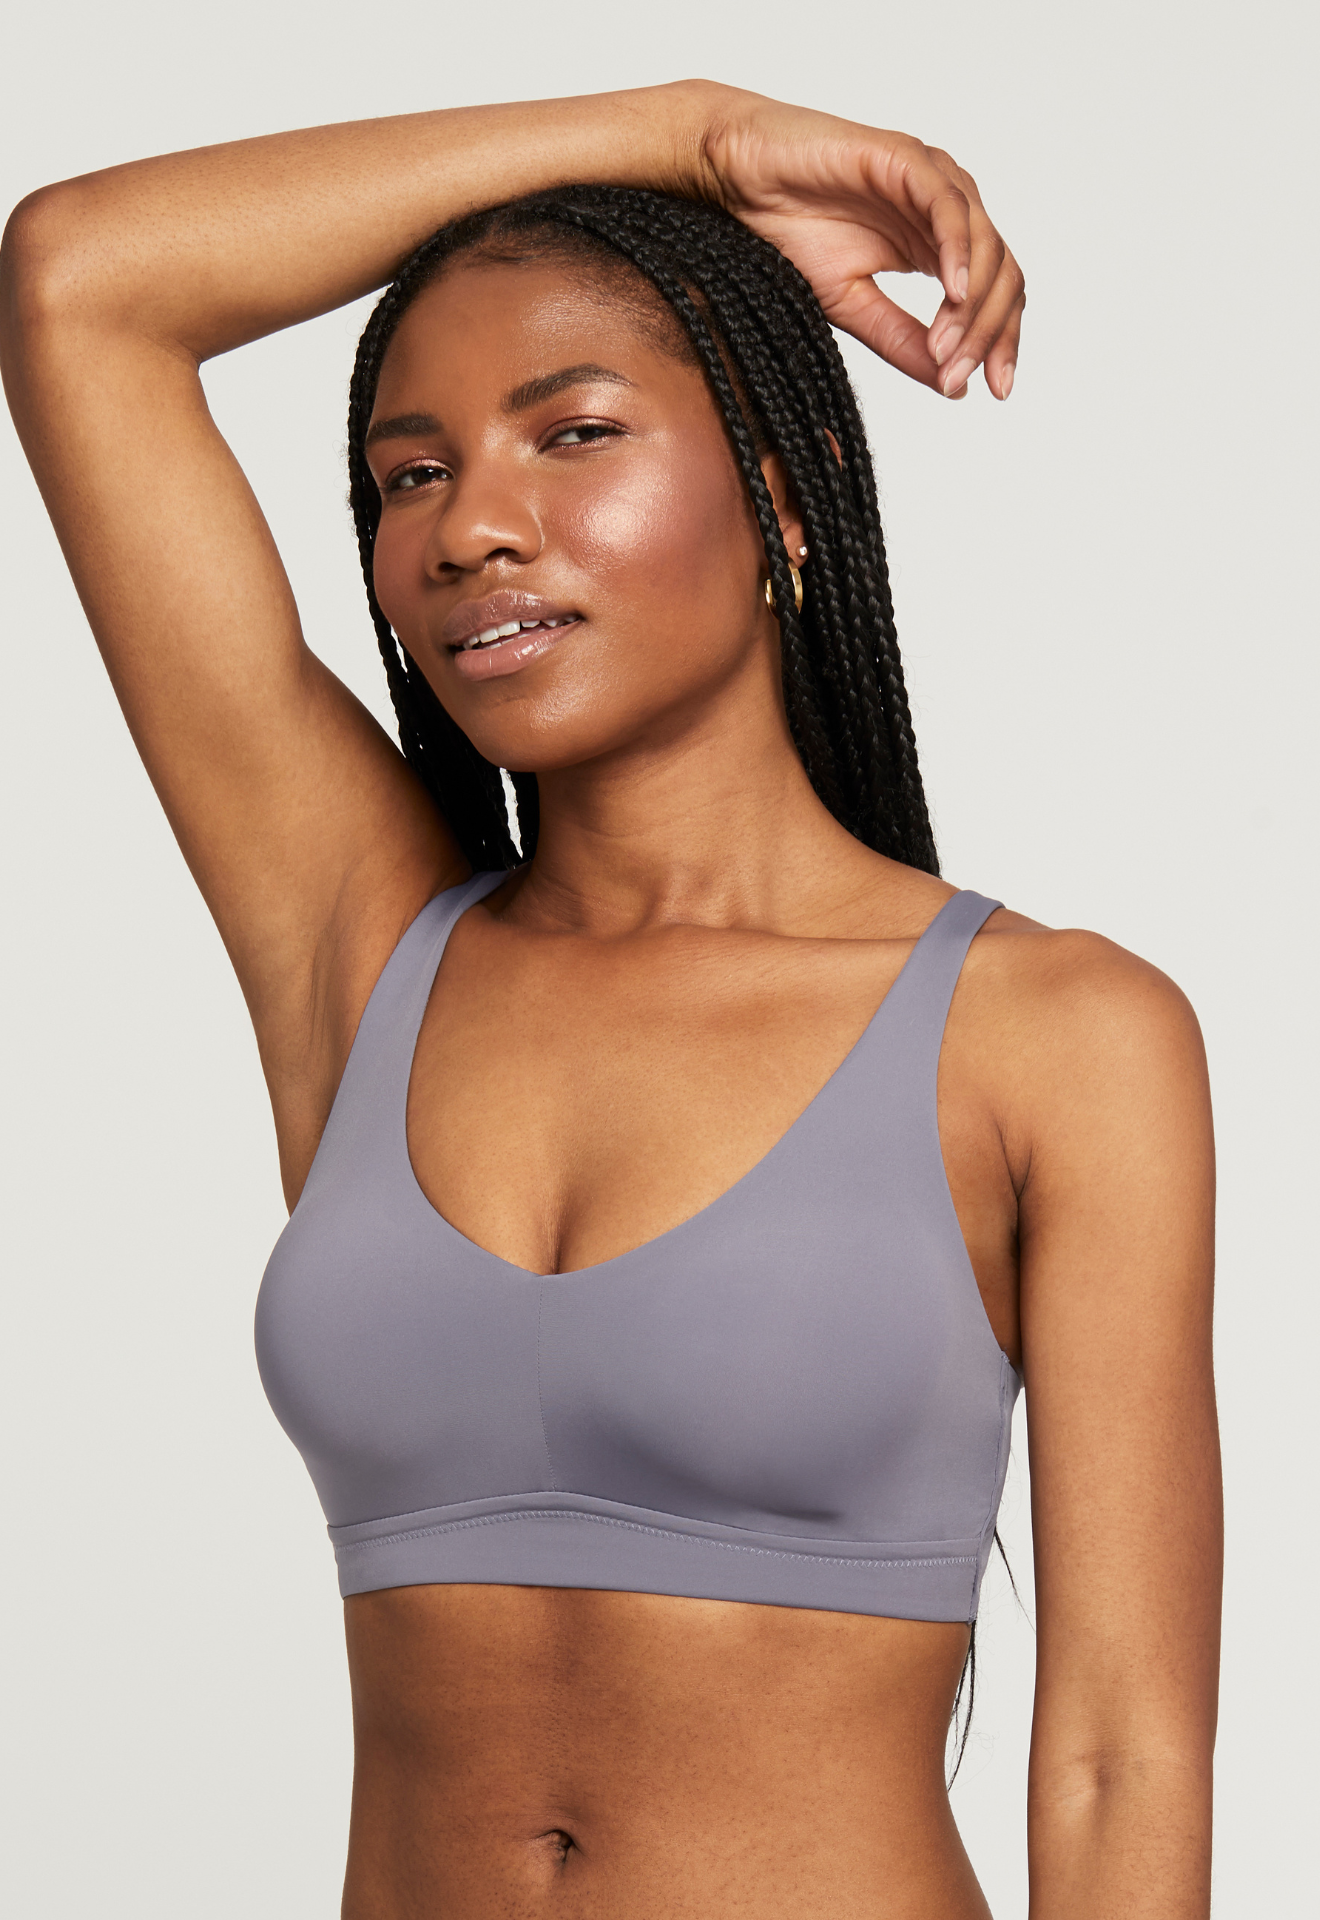 Mysa Cup-Sized Bralette - Crystal Grey worn by model front view